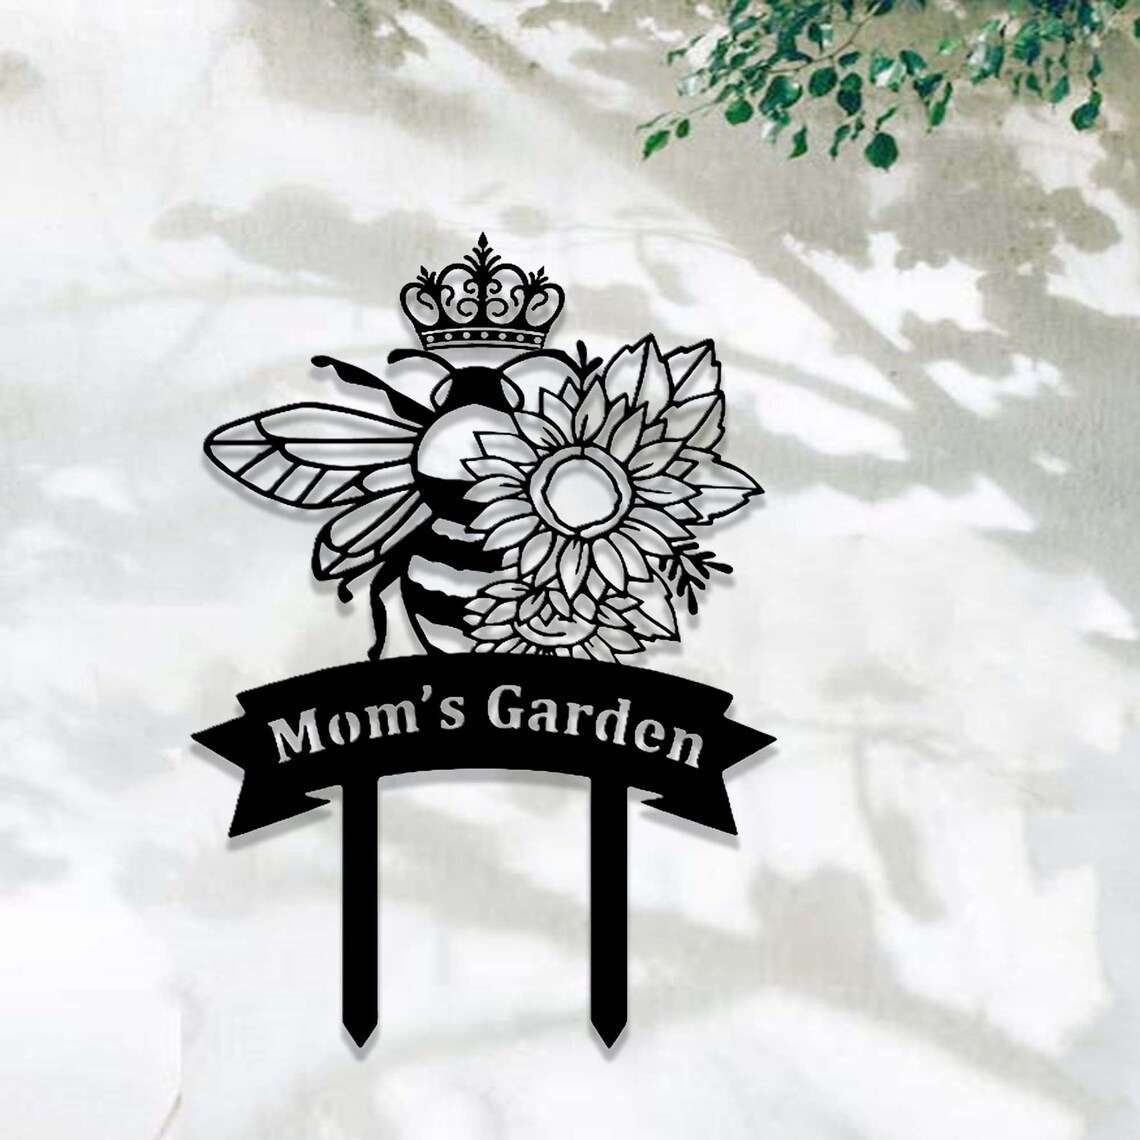 https://images.dinozozo.com/wp-content/uploads/2023/06/Personalized-Queen-Bee-with-Sunflowers-Garden-Yard-Stakes-Decorative-Custom-Metal-Sign-2.jpg